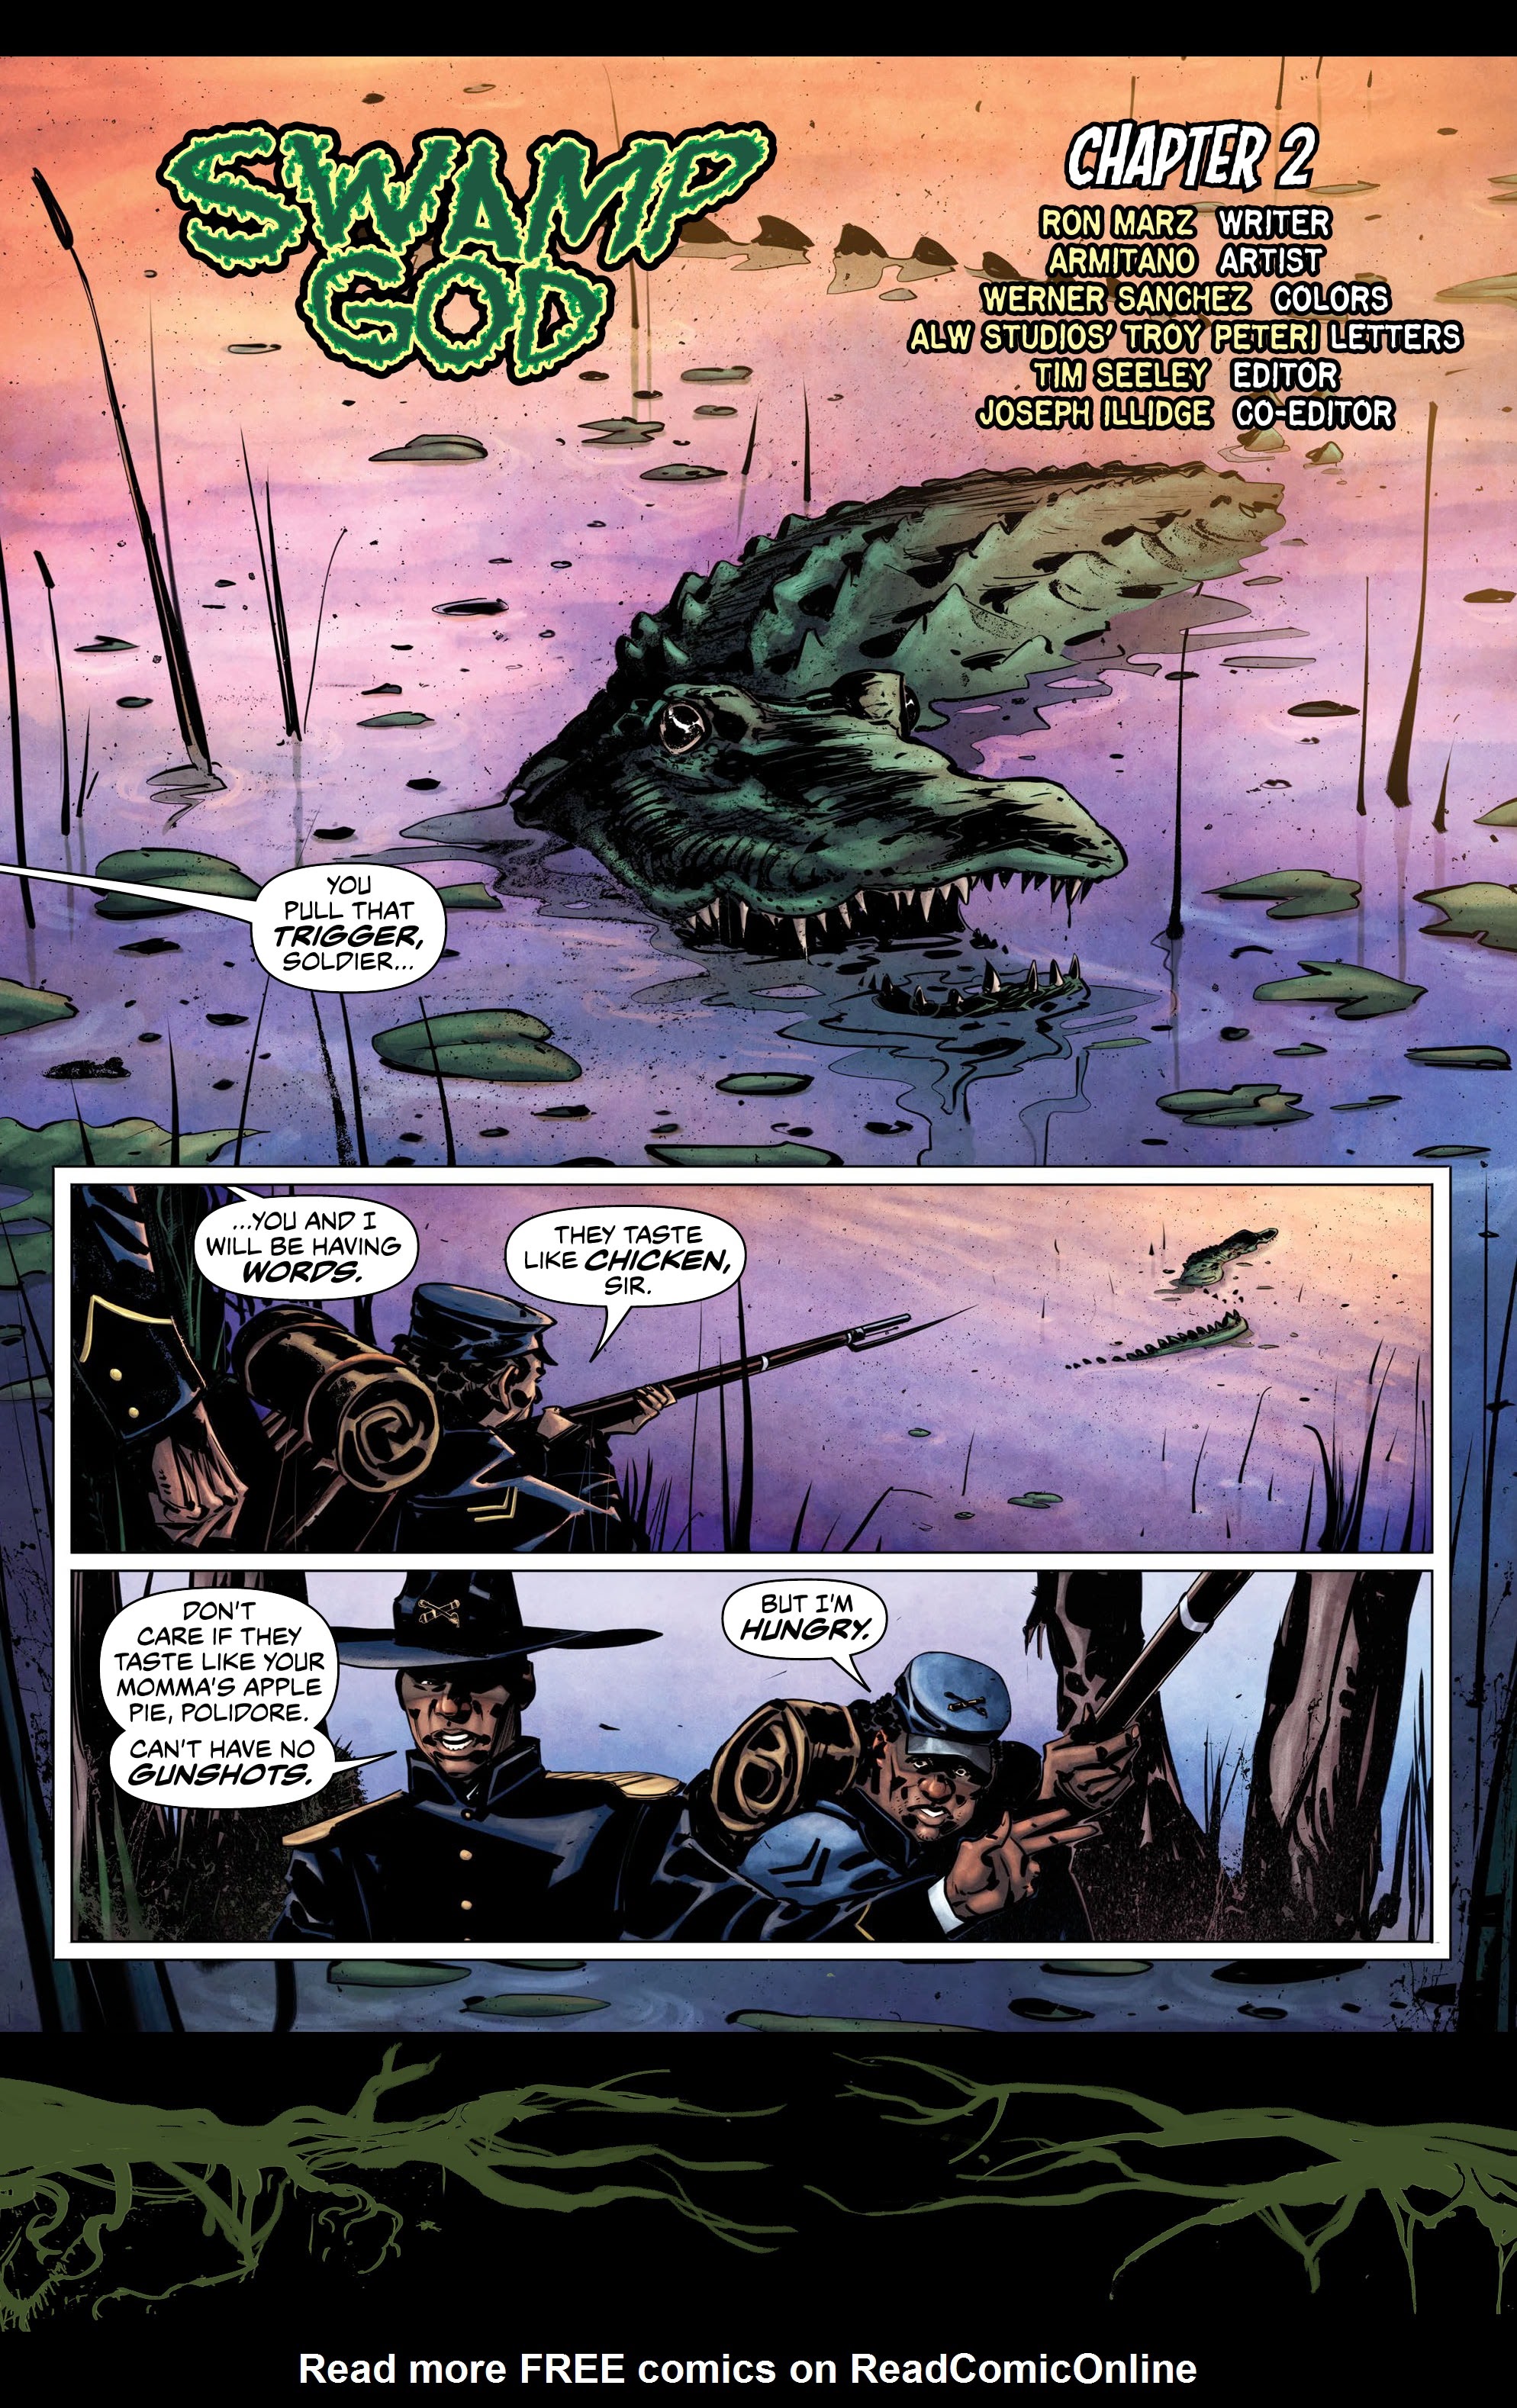 Read online Swamp God comic -  Issue #2 - 3